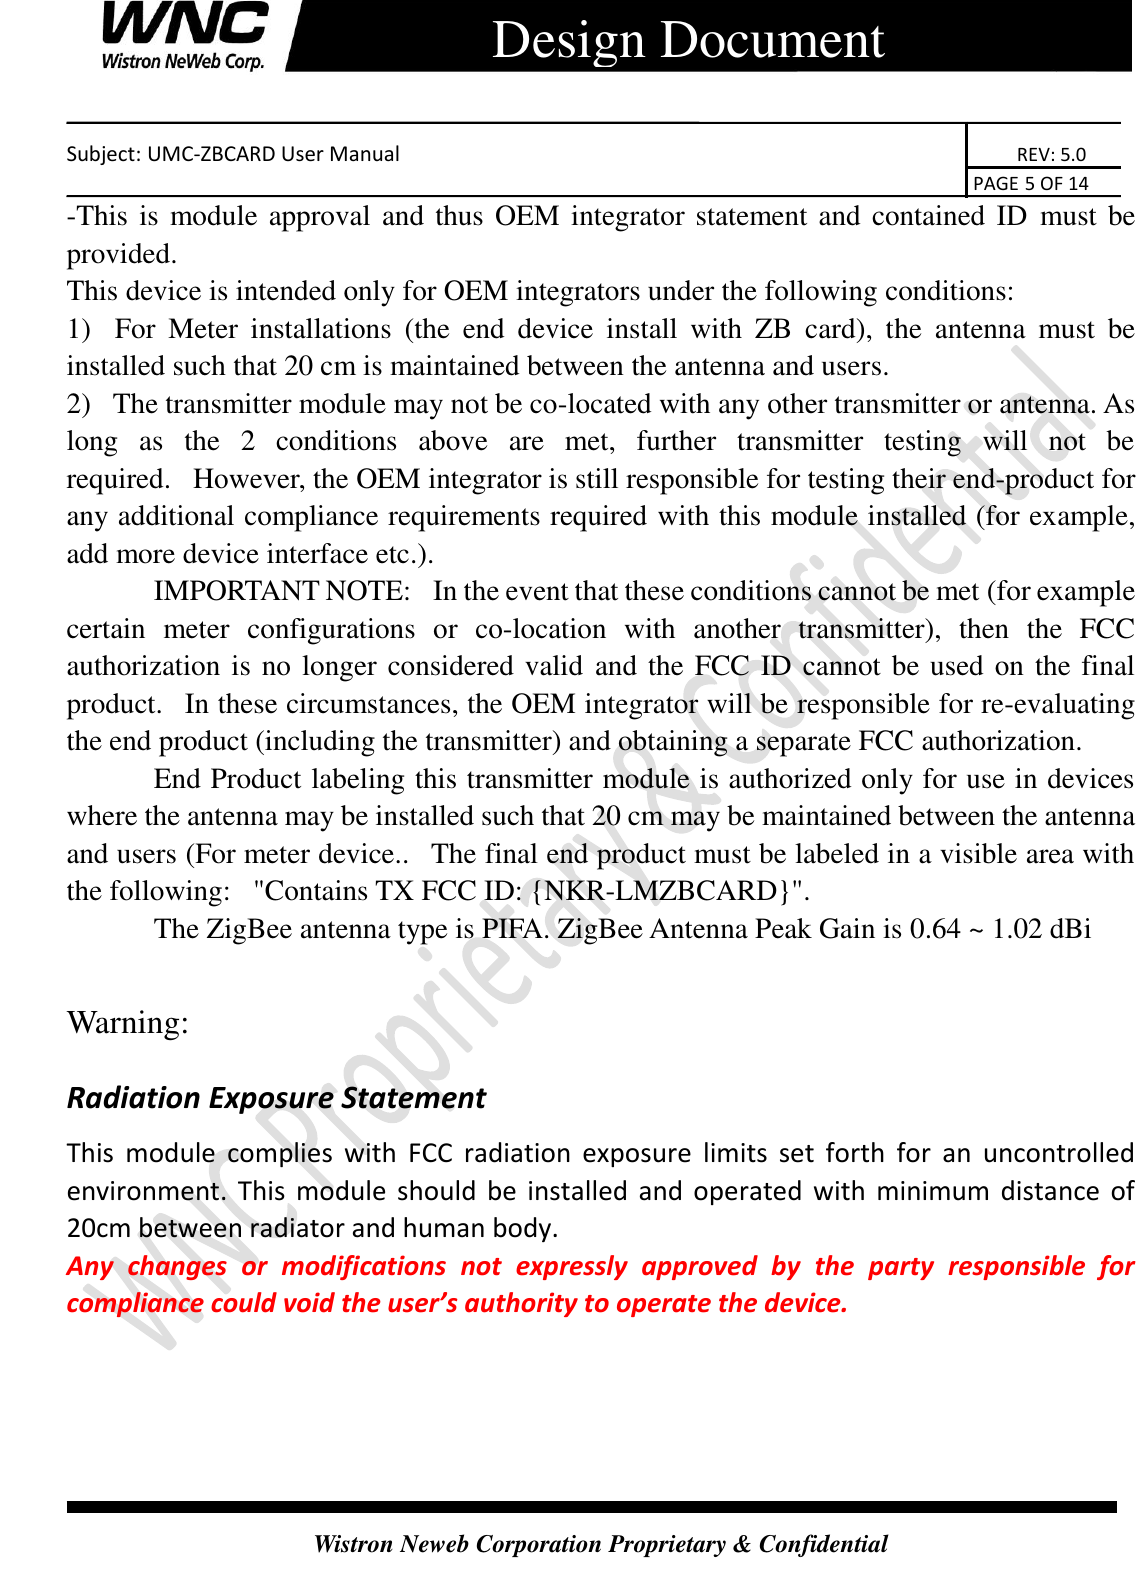    Subject: UMC-ZBCARD User Manual                                                                      REV: 5.0                                                                                        PAGE 5 OF 14  Wistron Neweb Corporation Proprietary &amp; Confidential      Design Document -This is module approval and thus OEM integrator statement and contained ID must be provided.   This device is intended only for OEM integrators under the following conditions: 1)   For  Meter  installations  (the  end  device  install  with  ZB  card),  the  antenna  must  be installed such that 20 cm is maintained between the antenna and users.    2)   The transmitter module may not be co-located with any other transmitter or antenna. As long  as  the  2  conditions  above  are  met,  further  transmitter  testing  will  not  be required.   However, the OEM integrator is still responsible for testing their end-product for any additional compliance requirements required with this module installed (for example, add more device interface etc.).             IMPORTANT NOTE:   In the event that these conditions cannot be met (for example certain  meter  configurations  or  co-location  with  another  transmitter),  then  the  FCC authorization is no longer considered valid and the FCC ID cannot be used on the final product.   In these circumstances, the OEM integrator will be responsible for re-evaluating the end product (including the transmitter) and obtaining a separate FCC authorization.             End Product labeling this transmitter module is authorized only for use in devices where the antenna may be installed such that 20 cm may be maintained between the antenna and users (For meter device..   The final end product must be labeled in a visible area with the following:   &quot;Contains TX FCC ID: {NKR-LMZBCARD}&quot;.                The ZigBee antenna type is PIFA. ZigBee Antenna Peak Gain is 0.64 ~ 1.02 dBi    Warning:  Radiation Exposure Statement   This  module  complies  with  FCC  radiation  exposure  limits  set  forth  for  an  uncontrolled environment.  This  module  should  be  installed  and  operated  with  minimum  distance  of 20cm between radiator and human body.   Any  changes  or  modifications  not  expressly  approved  by  the  party  responsible  for compliance could void the user’s authority to operate the device.   